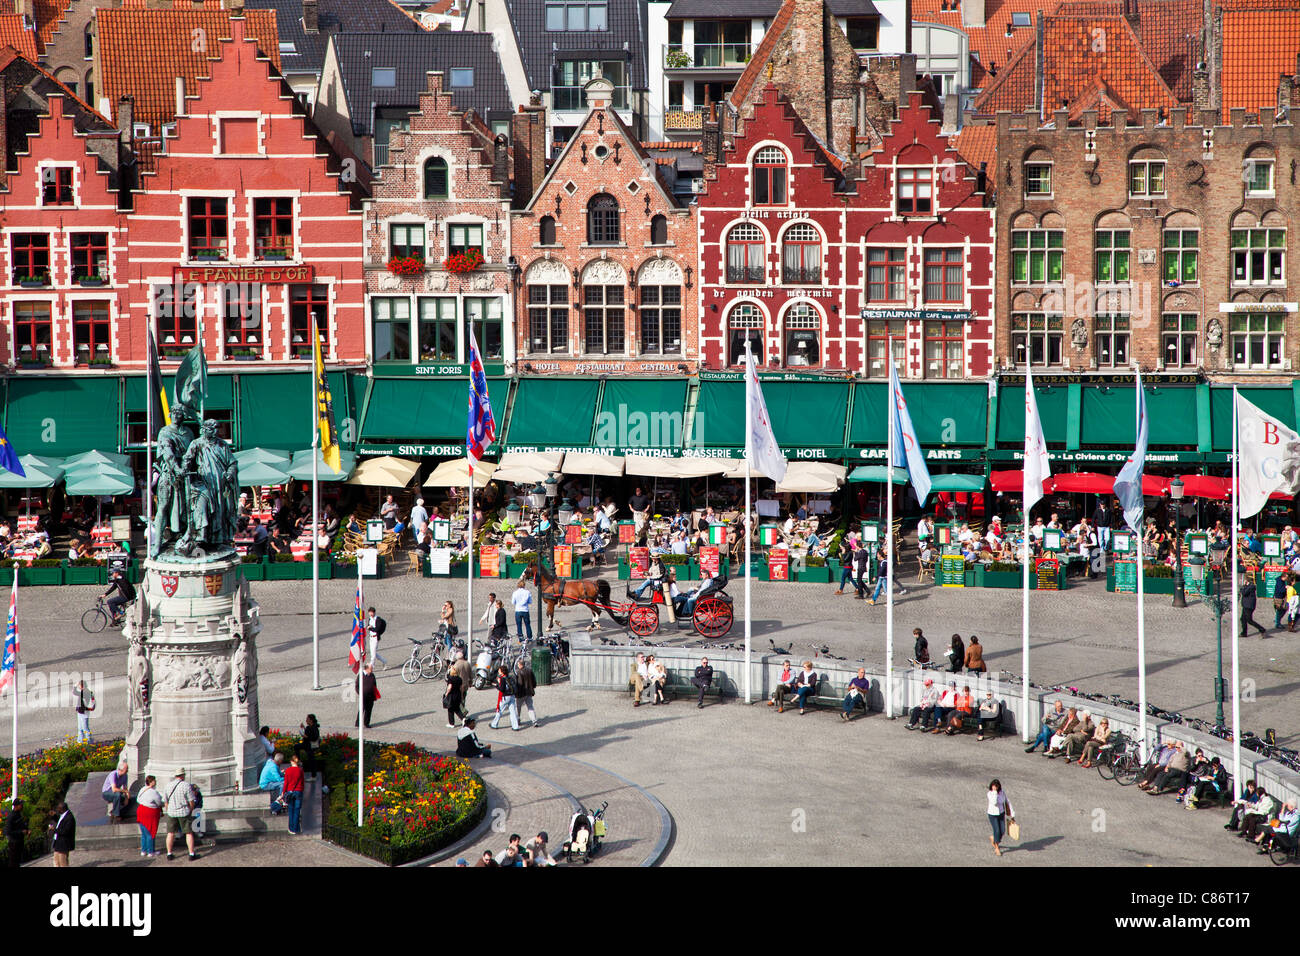 View from Belfry of the statue, bars, restaurants, and tourists in the Grote Markt or Market Square in Bruges, (Brugge), Belgium Stock Photo